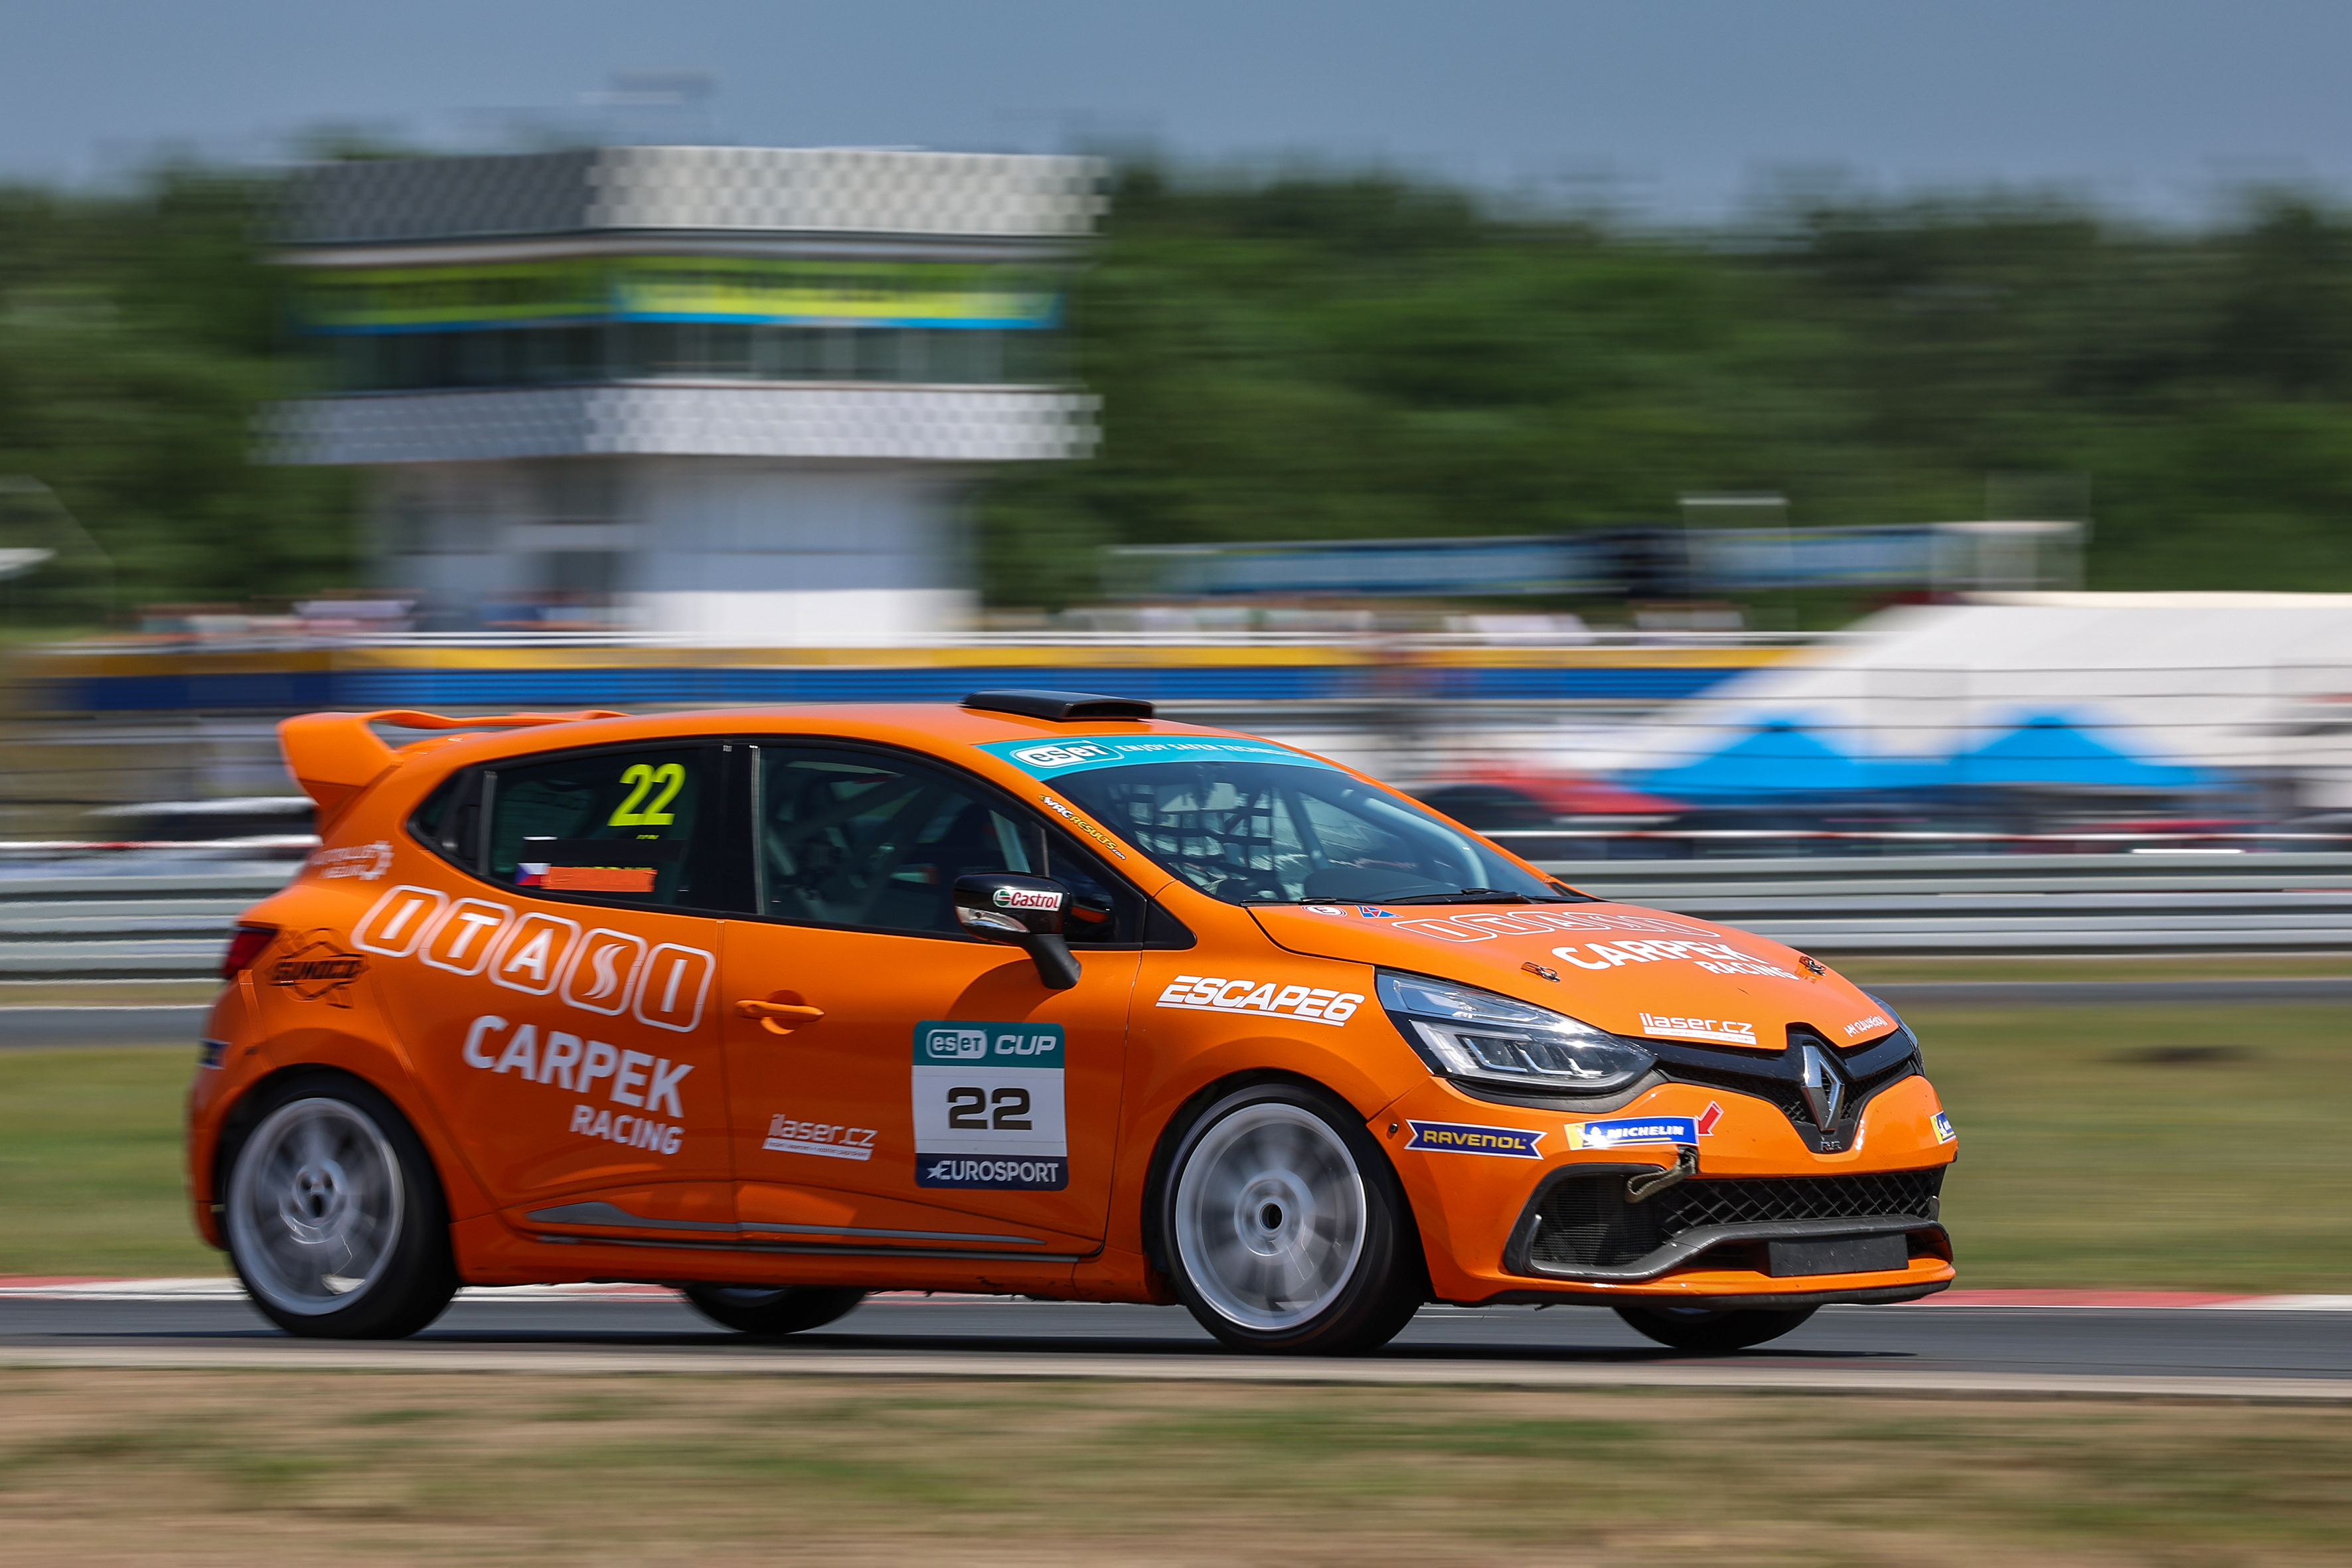 Tomáš Pekař won Clio Cup race, penalized Tobiash Poschik was second after a great chase